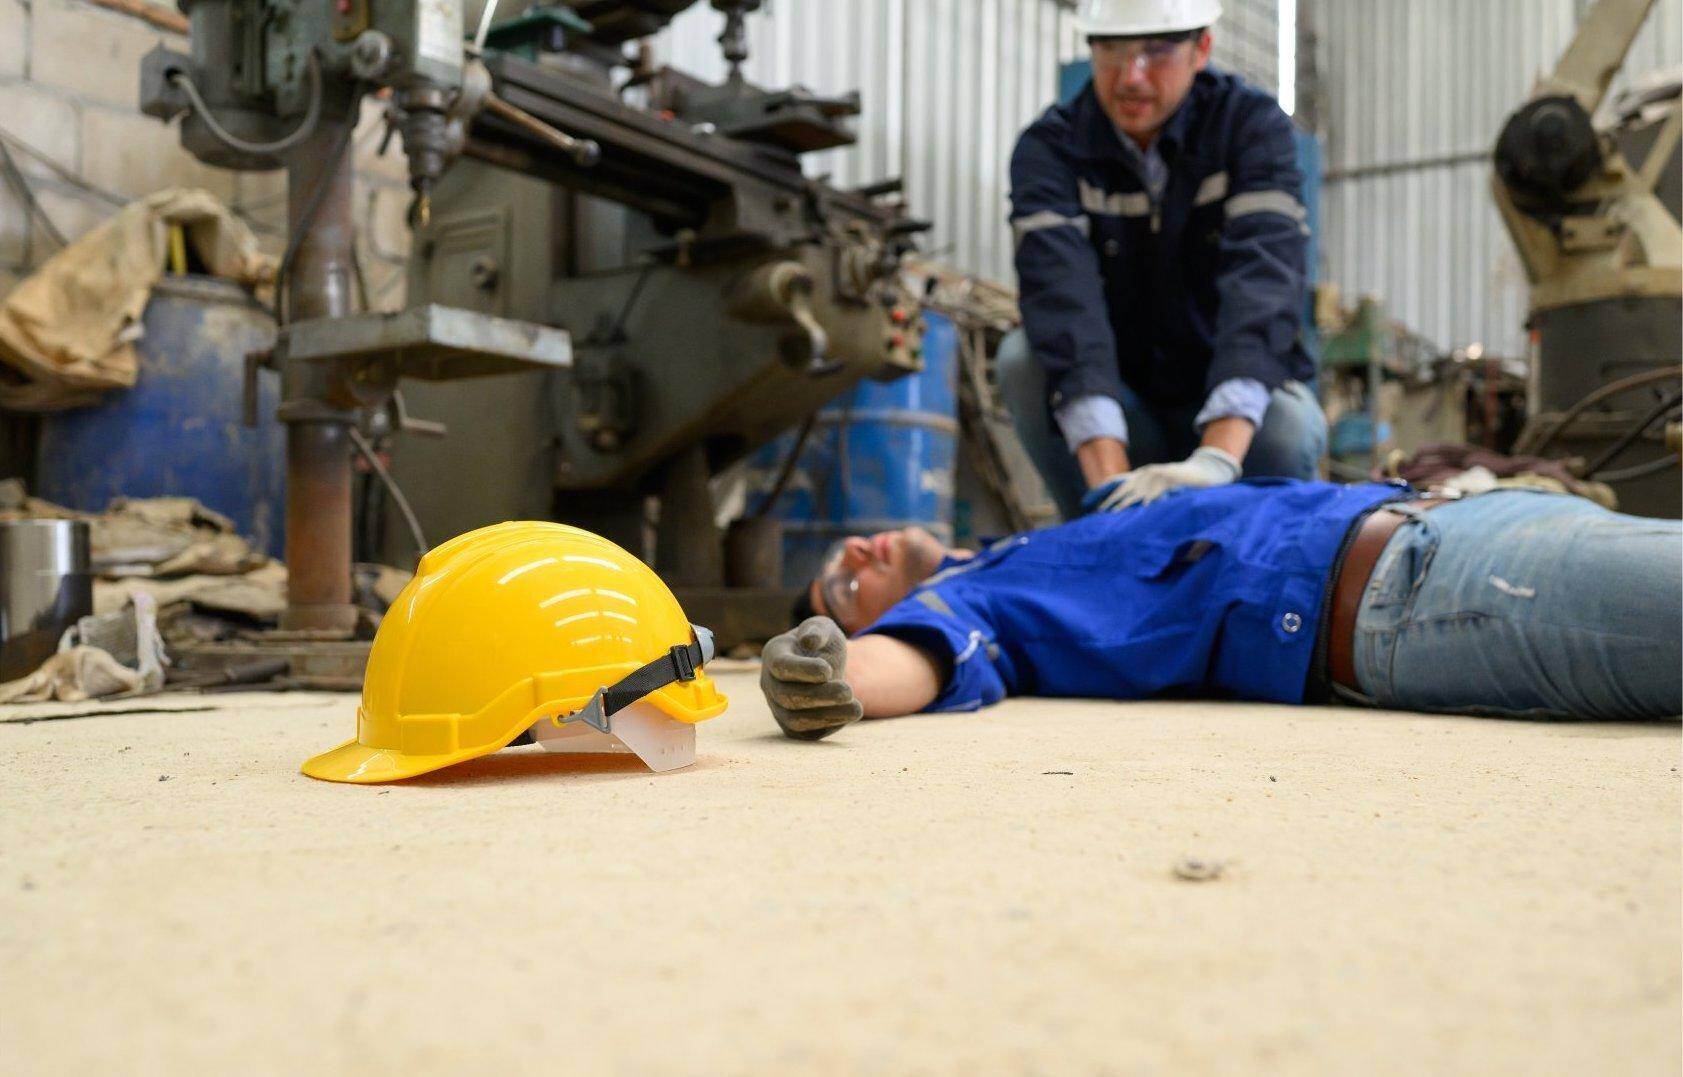 An unconscious man who has been injured on the job who will file for workers compensation in Dallas, Georgia